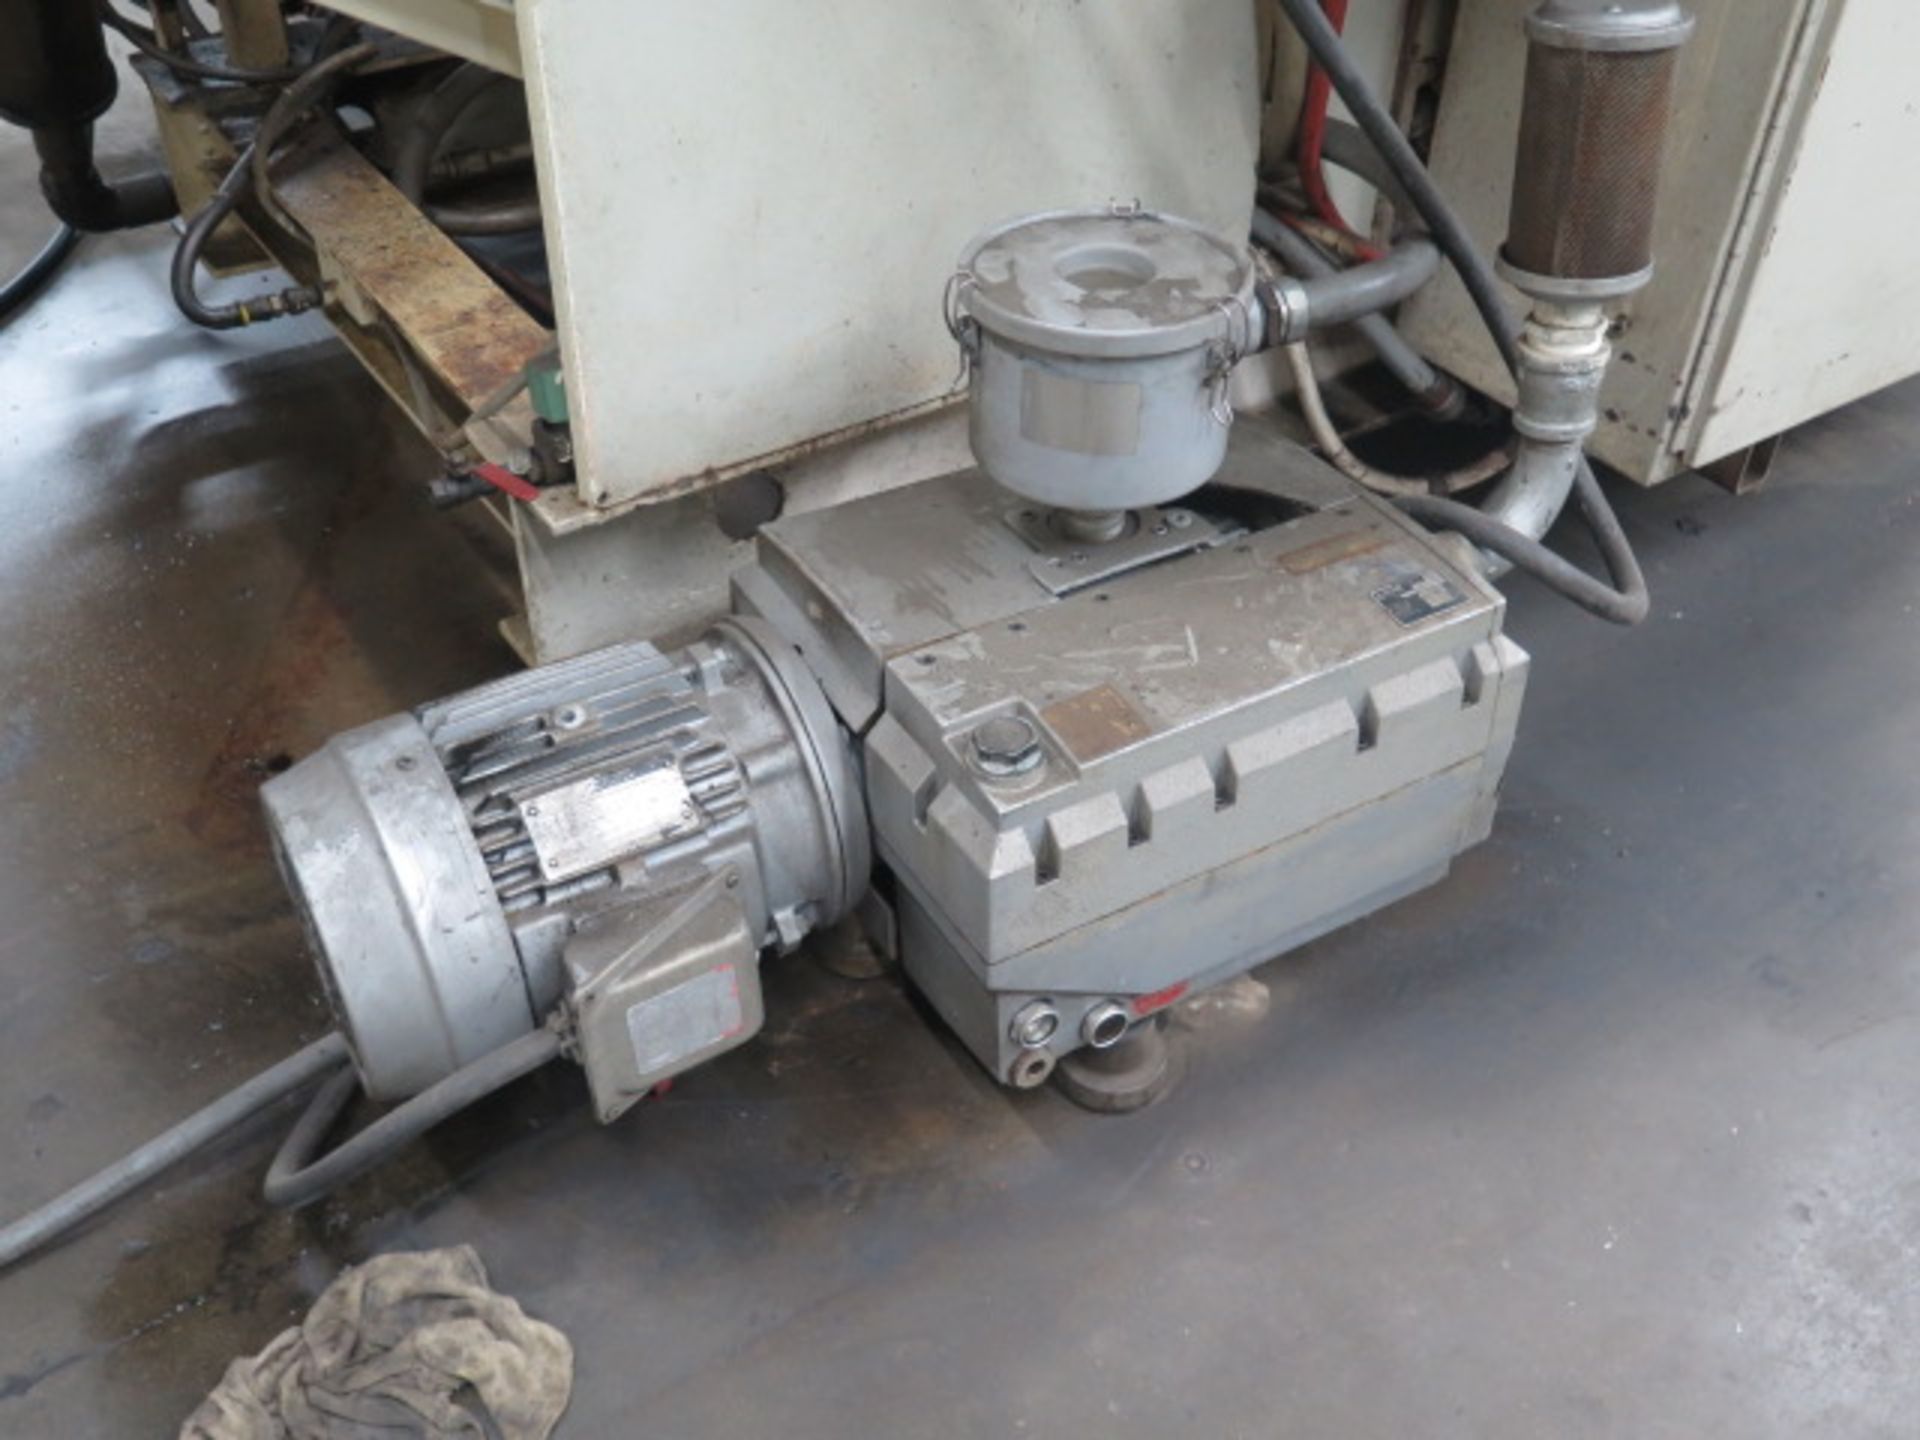 Sencorp Systems Thermoforming w/ Sencorp Controls, Film Preheater, 10” x 30” Vacuum, SOLD AS IS - Image 13 of 30